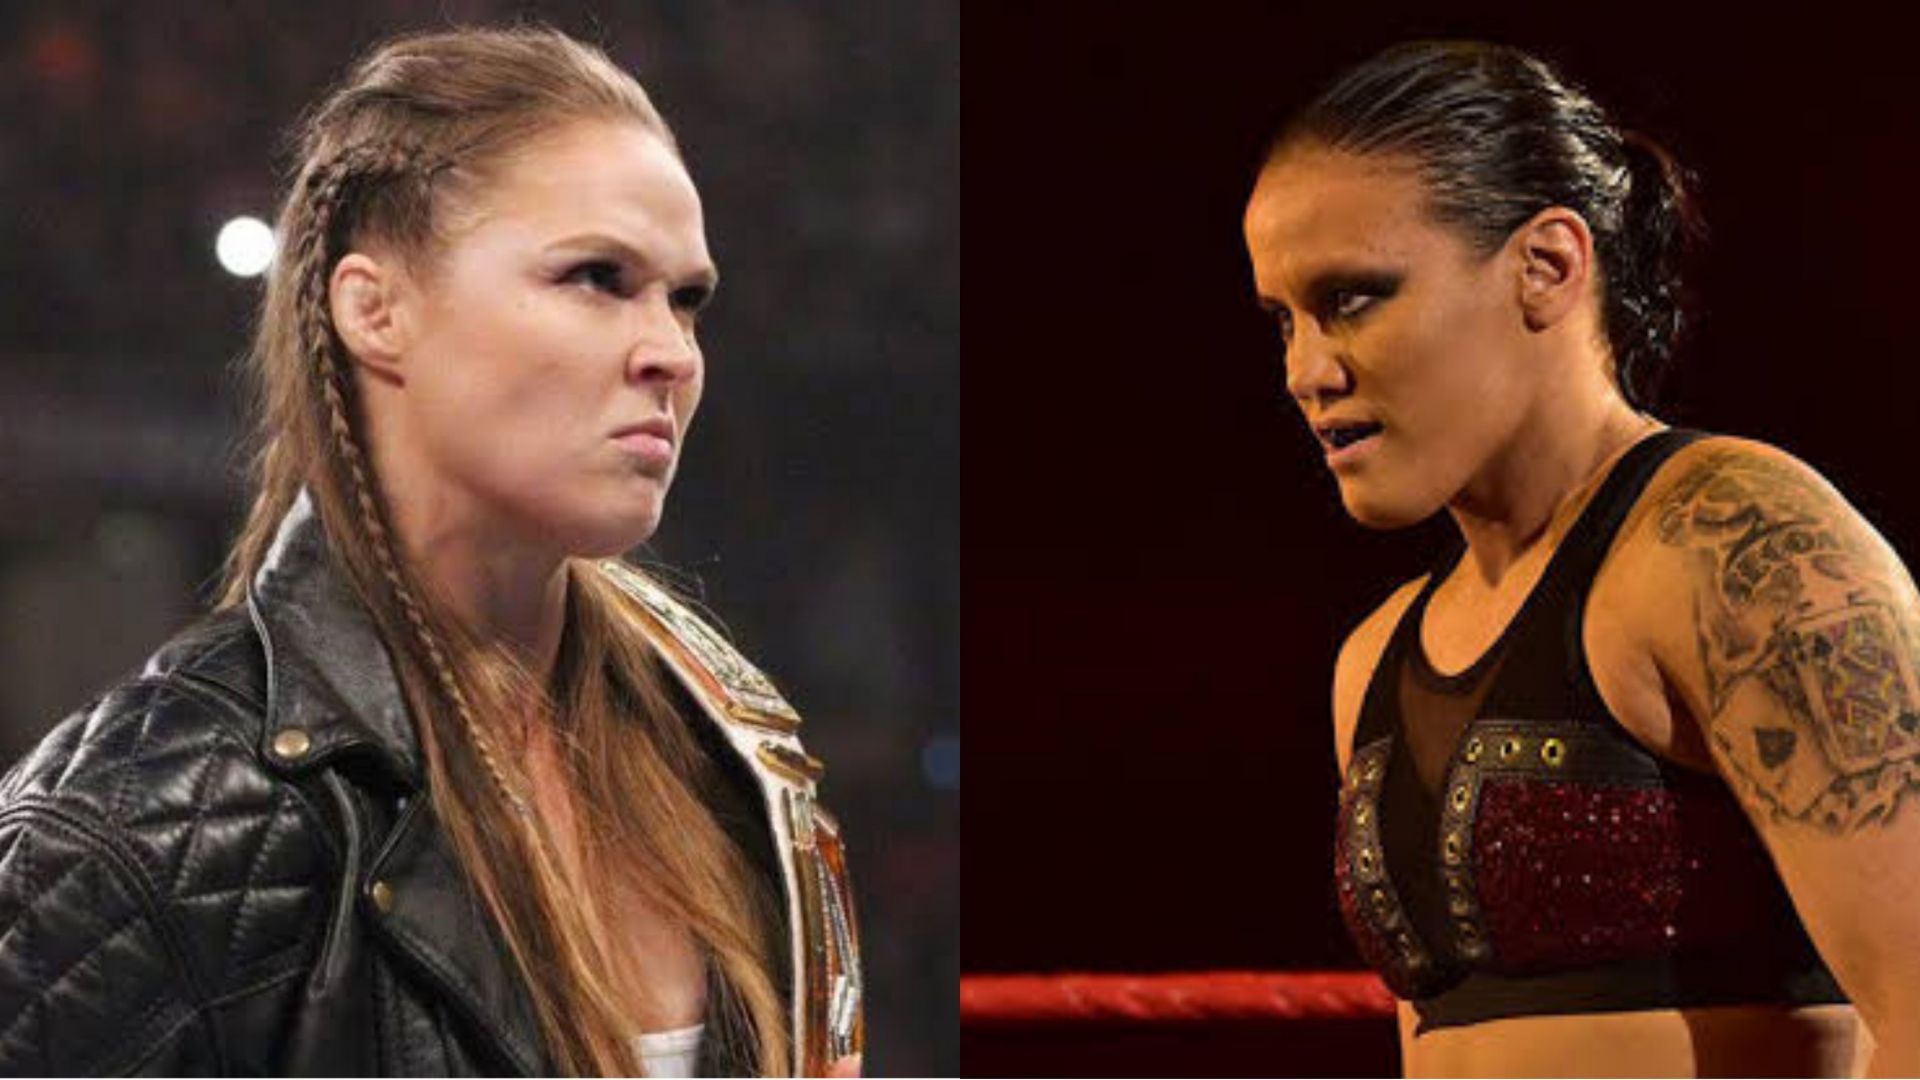 Ronda Rousey and Shayna Baszler got into a heated dispute